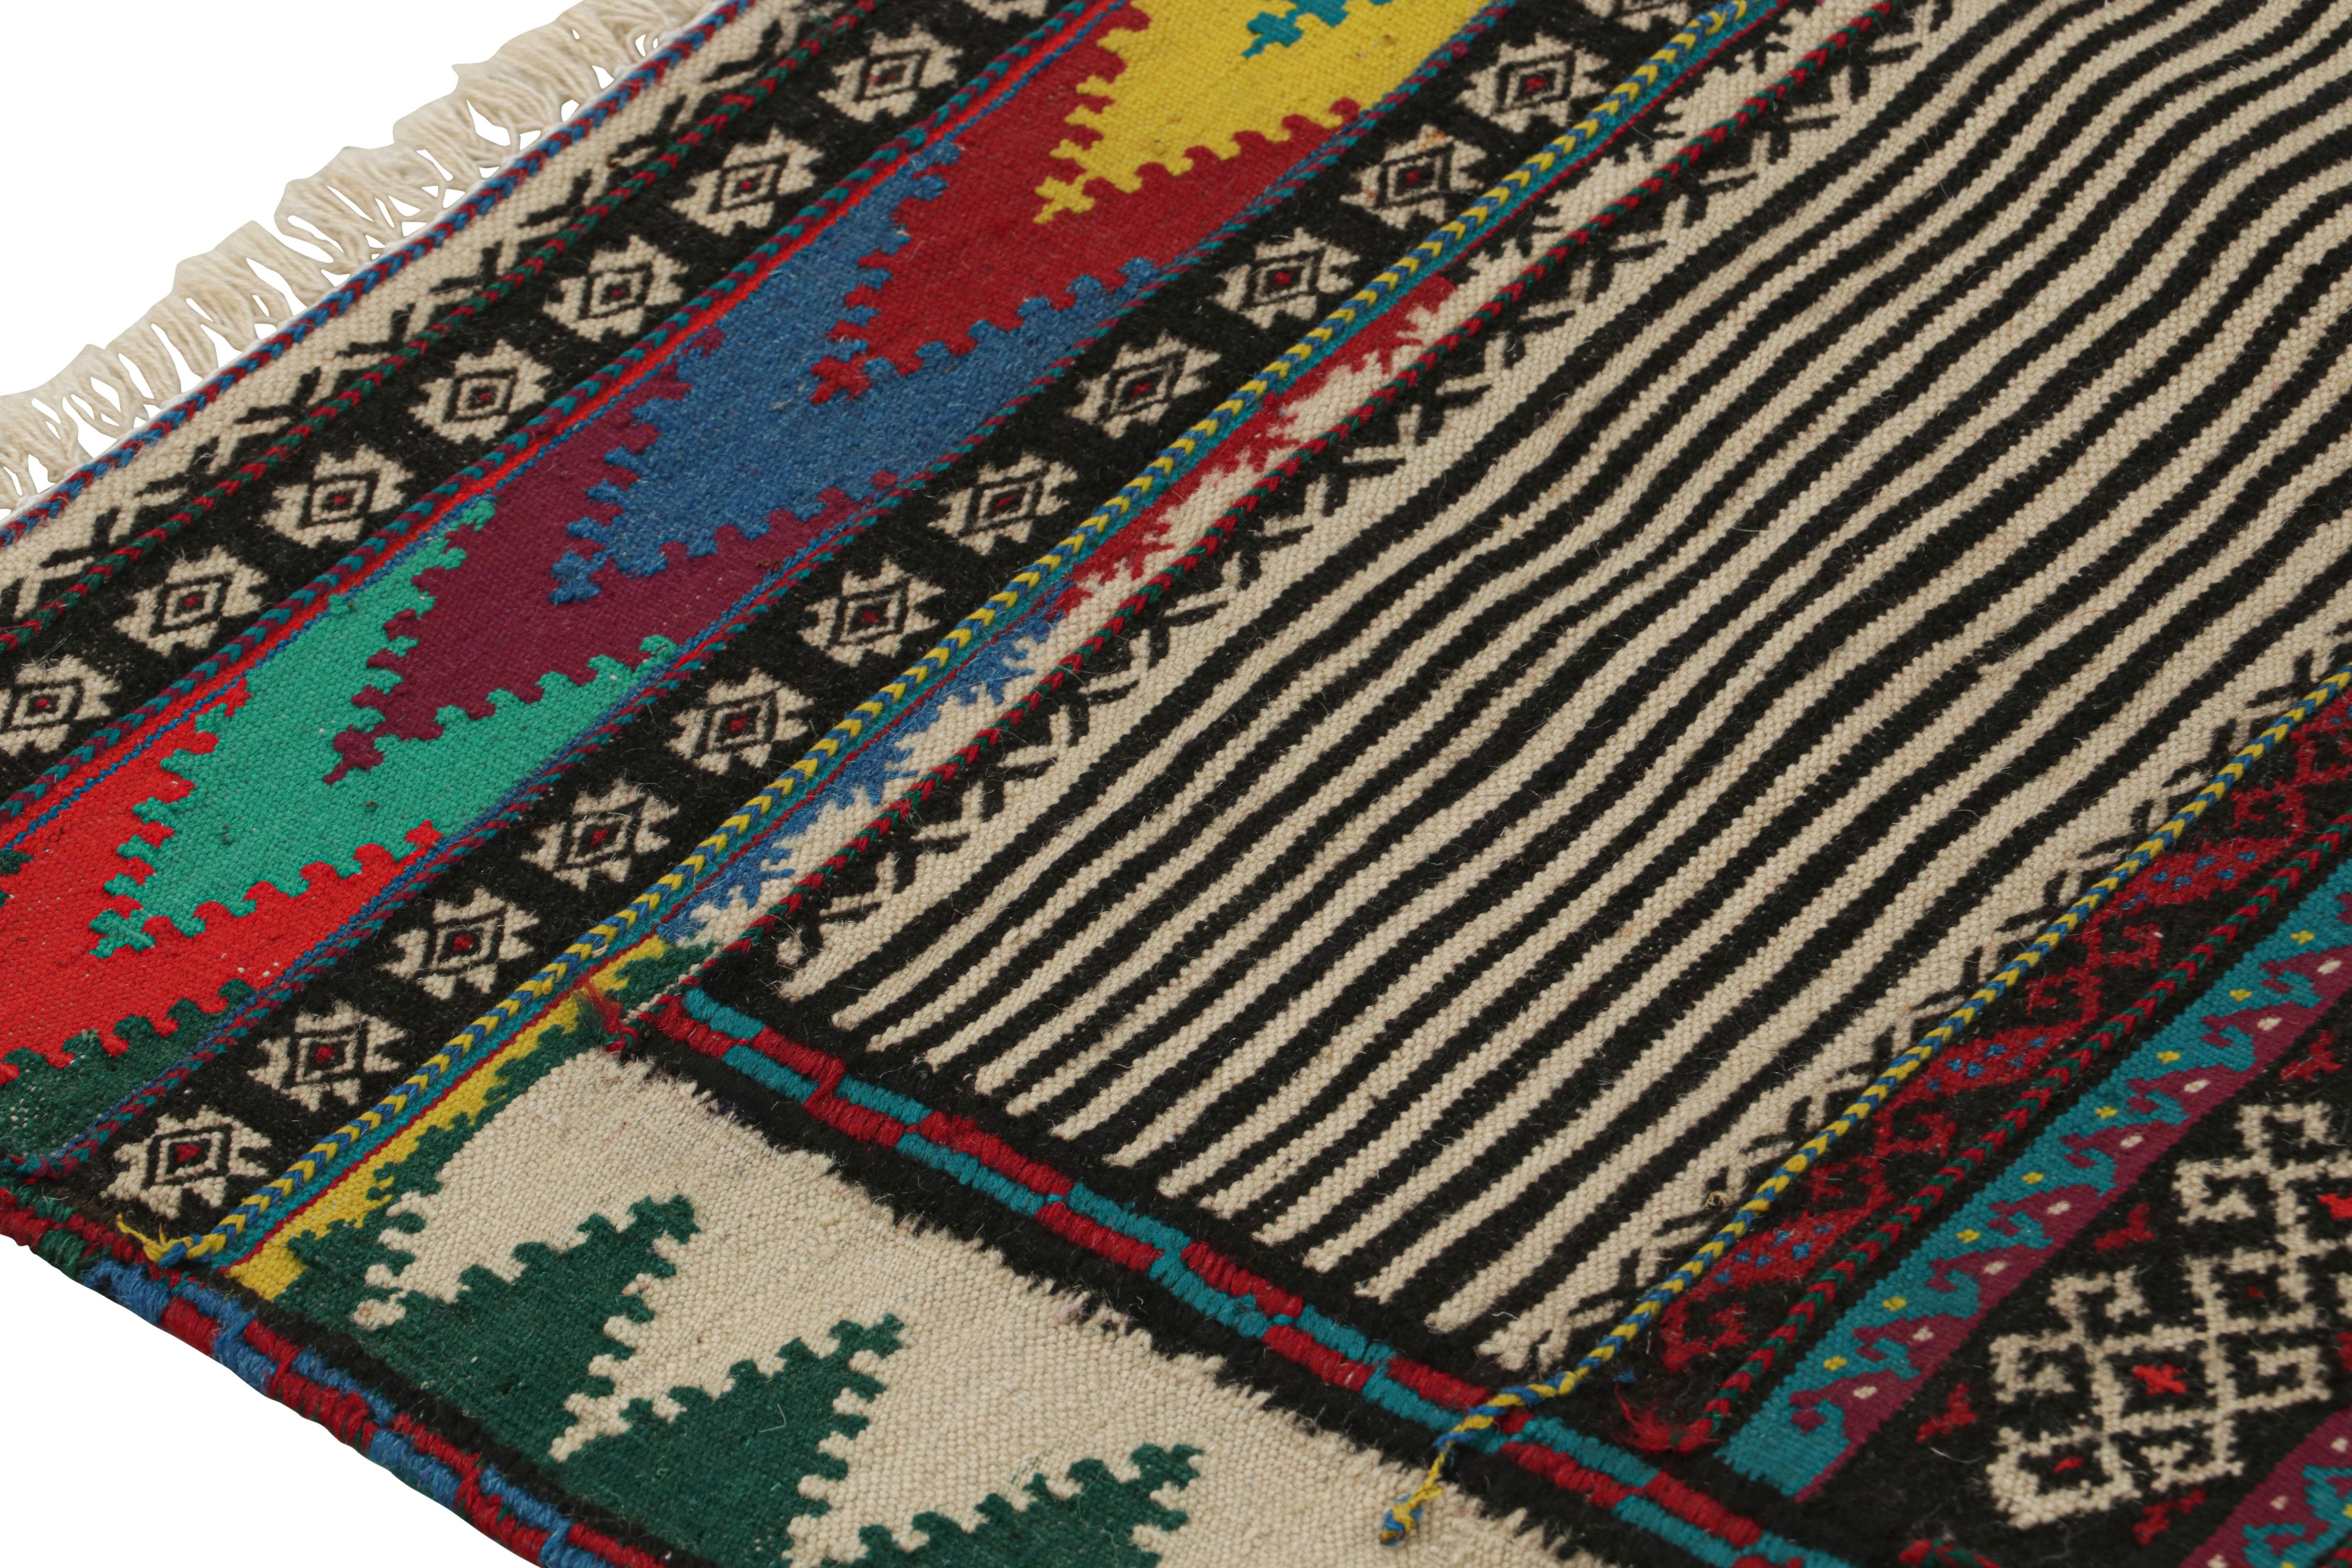 Tribal Vintage Afghan Kilim Rug with Stripes and Geometric Patterns, from Rug & Kilim For Sale